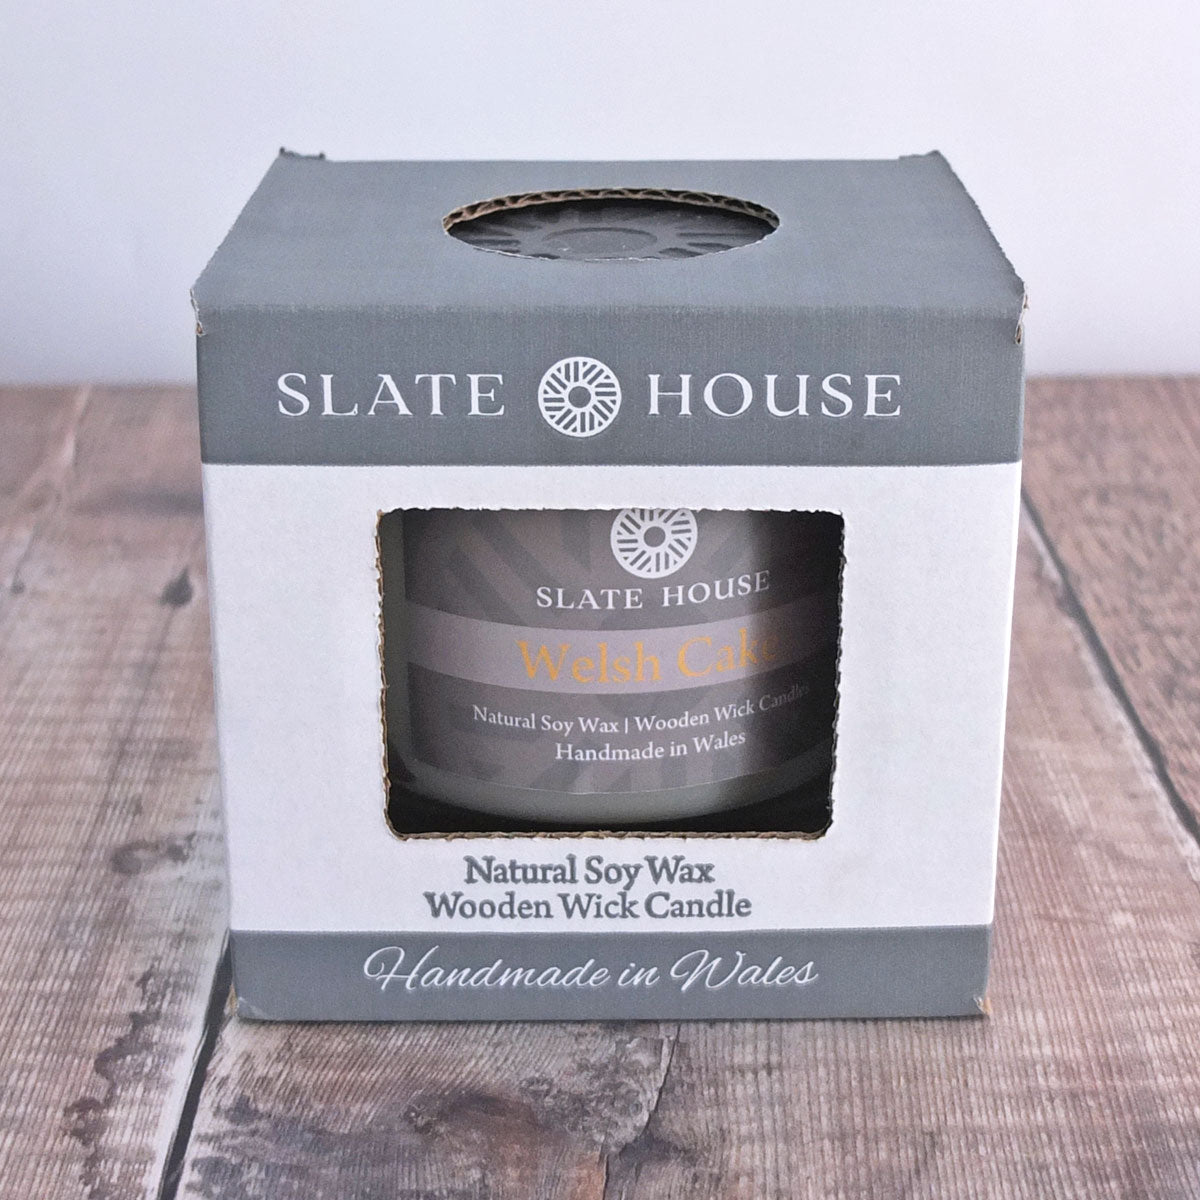 Welsh Cake Boxed Candle by Slate House